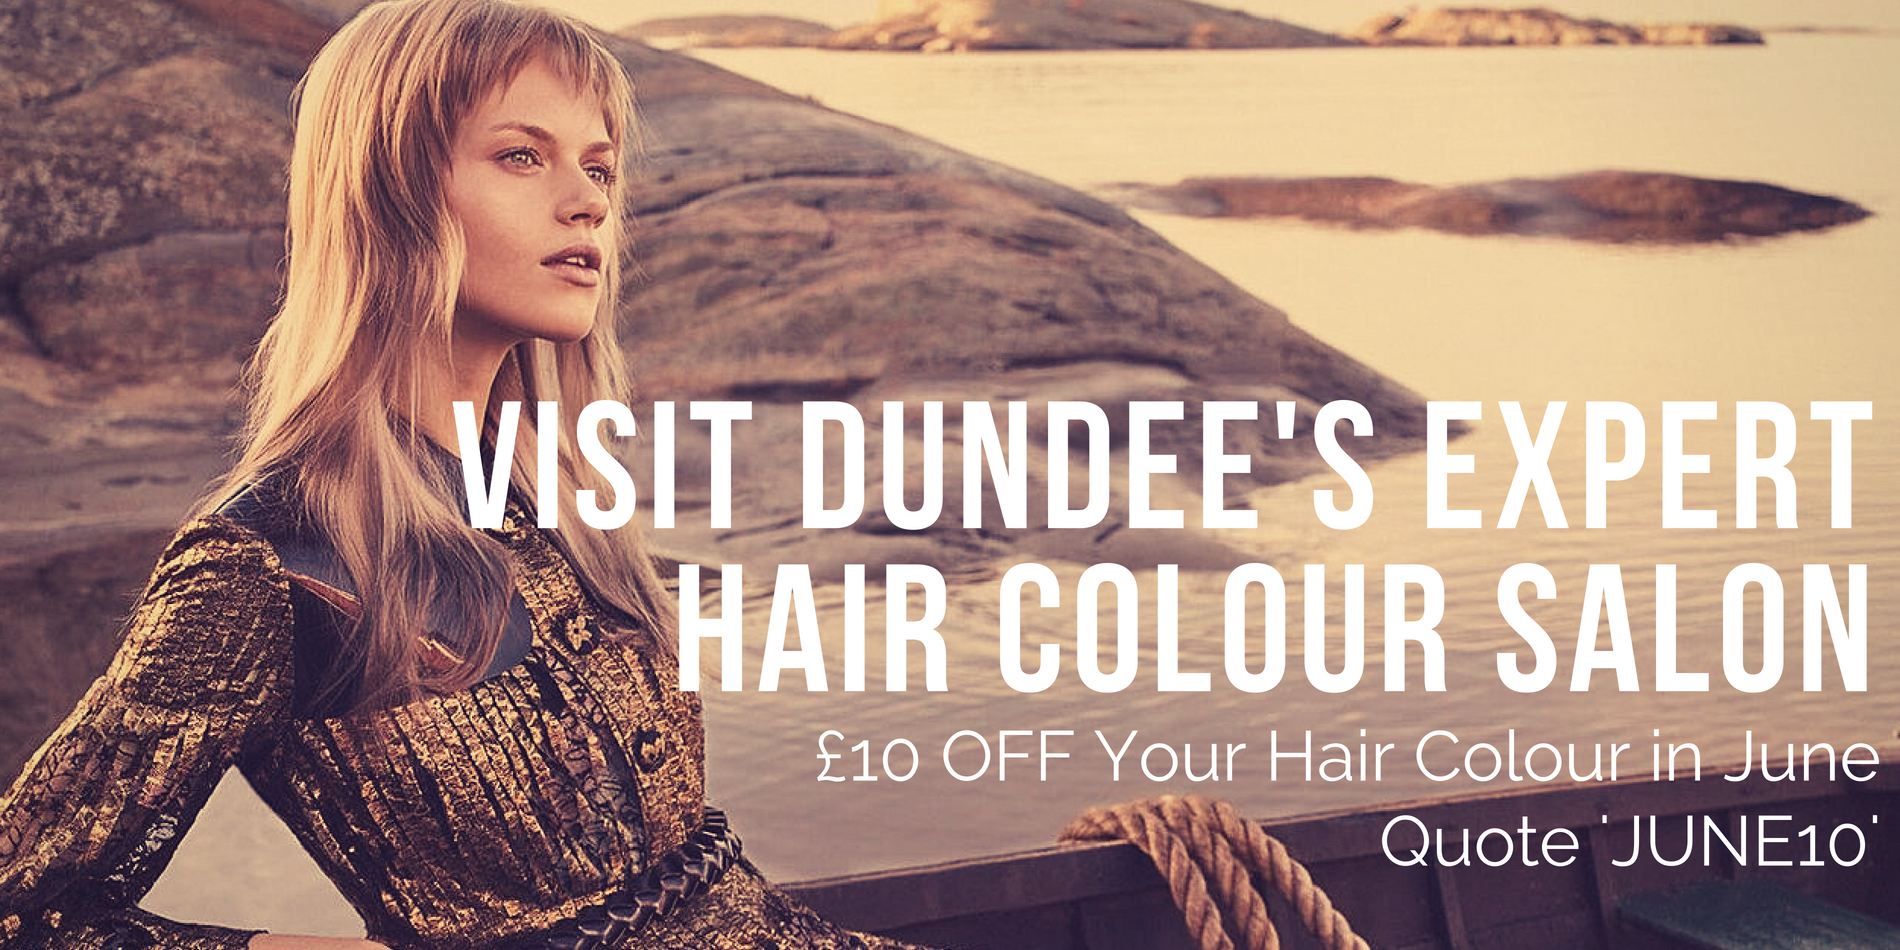 Get £10 OFF Your Hair Colour in June!